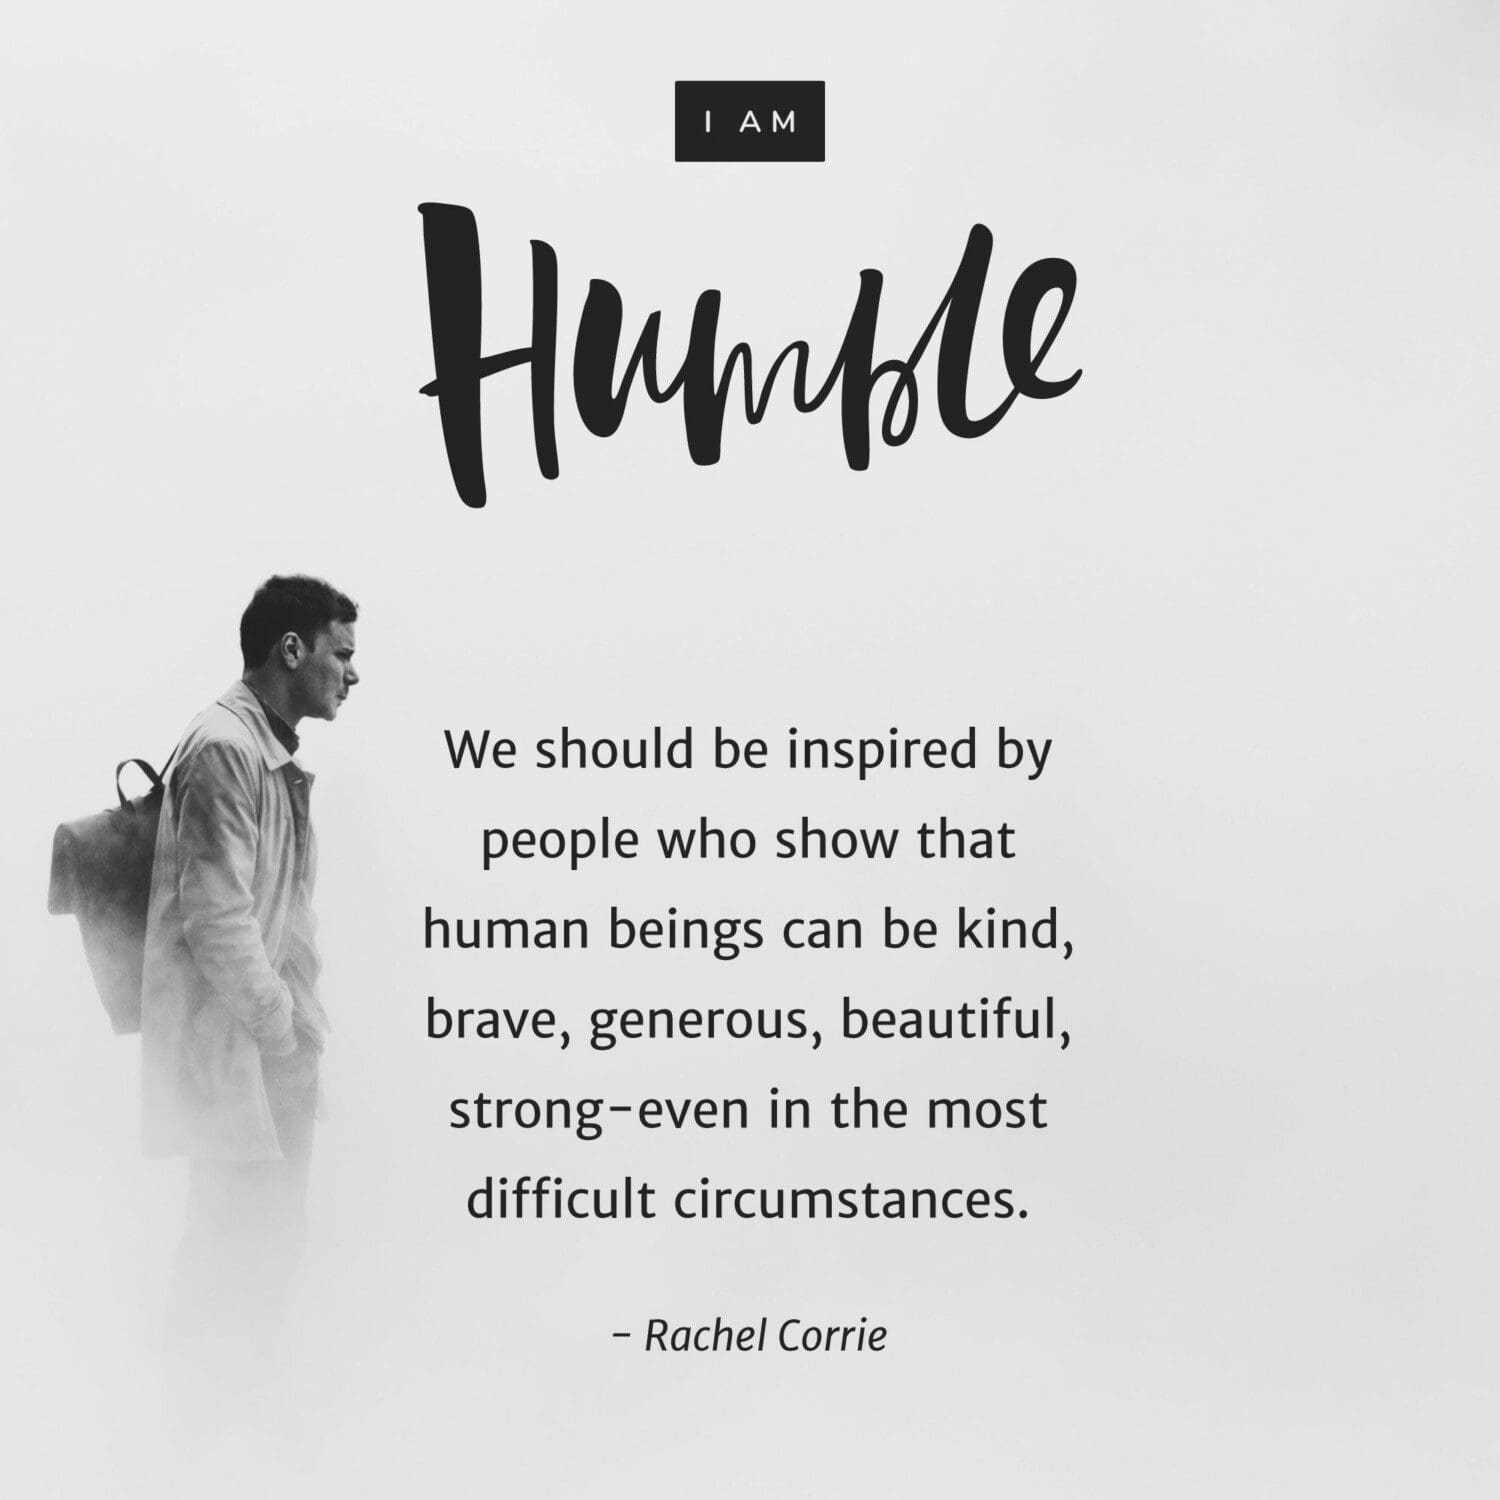 “We should be inspired by people… who show that human beings can be kind, brave, generous, beautiful, strong-even in the most difficult circumstances.“ – Rachel Corrie